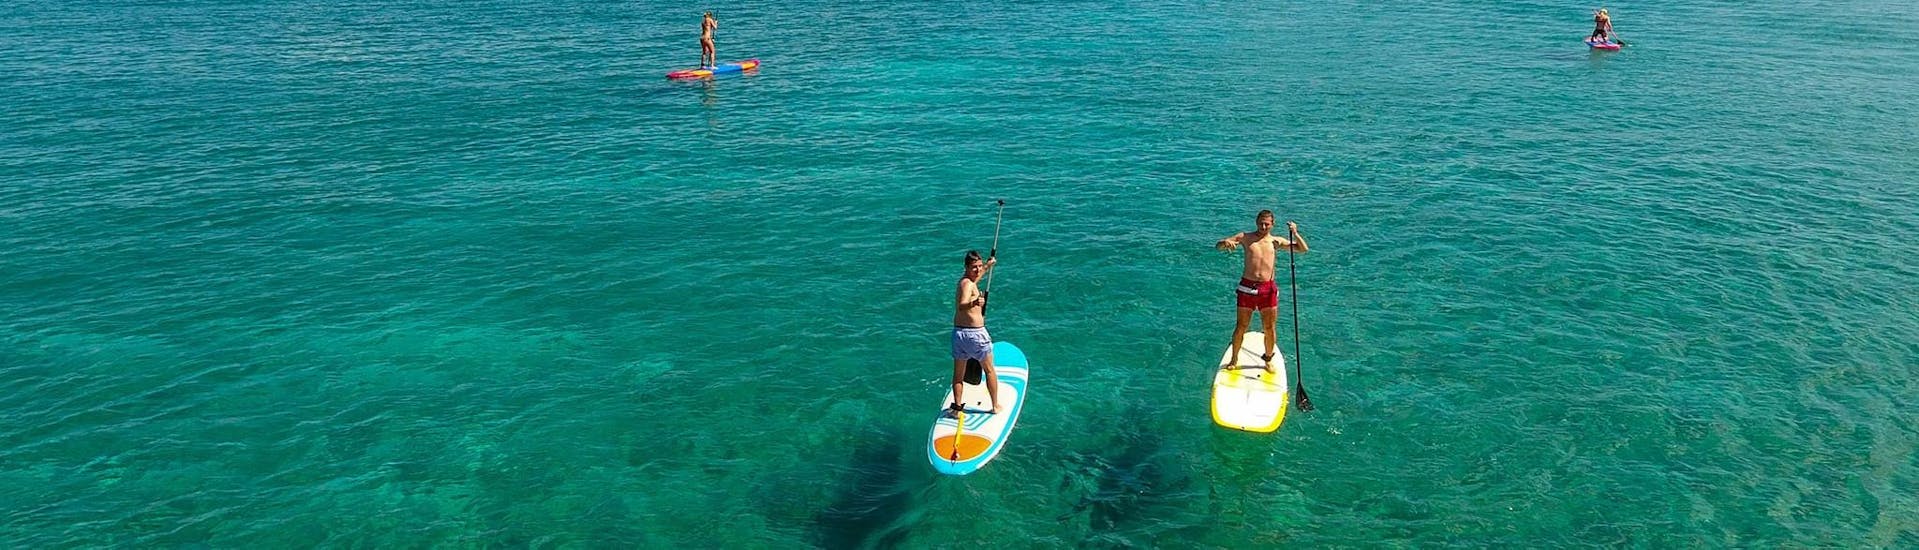 People on a SUP from Water Club Paradise Beach Kos.